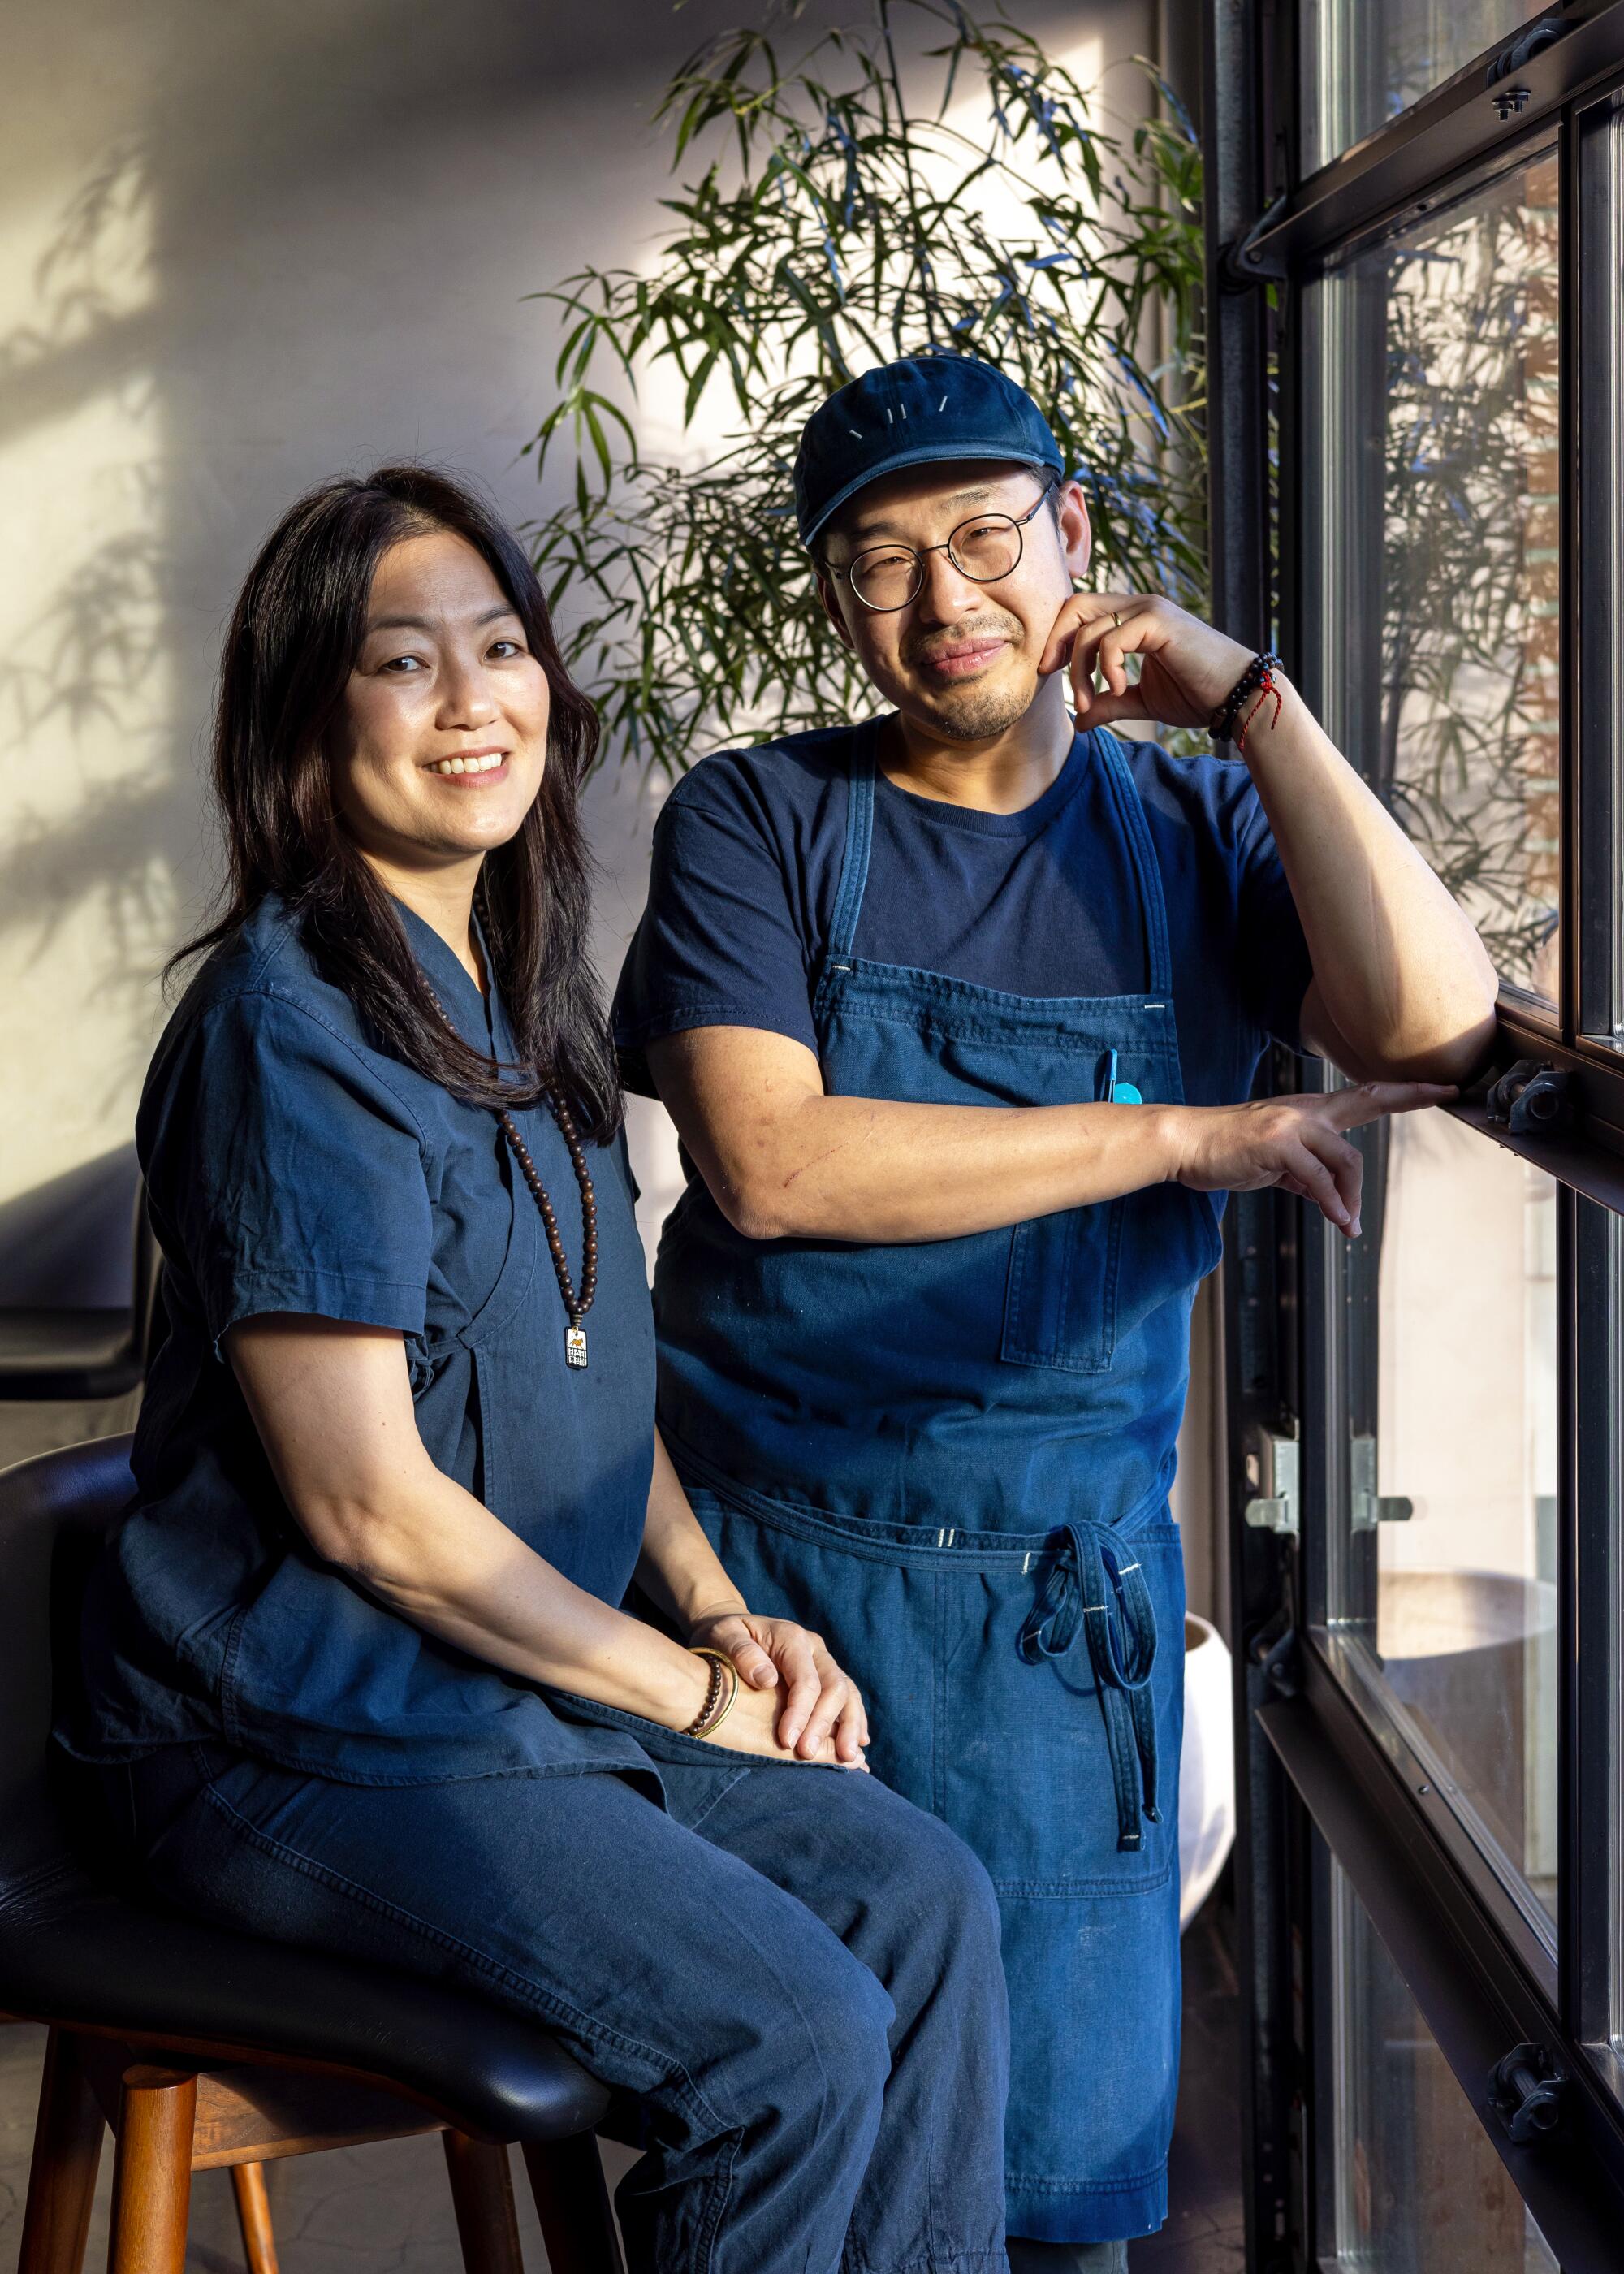 Baroo owners chef Kwang Uh, right, and Mina Park, a husband-and-wife restaurateur team, pose for a portrait.